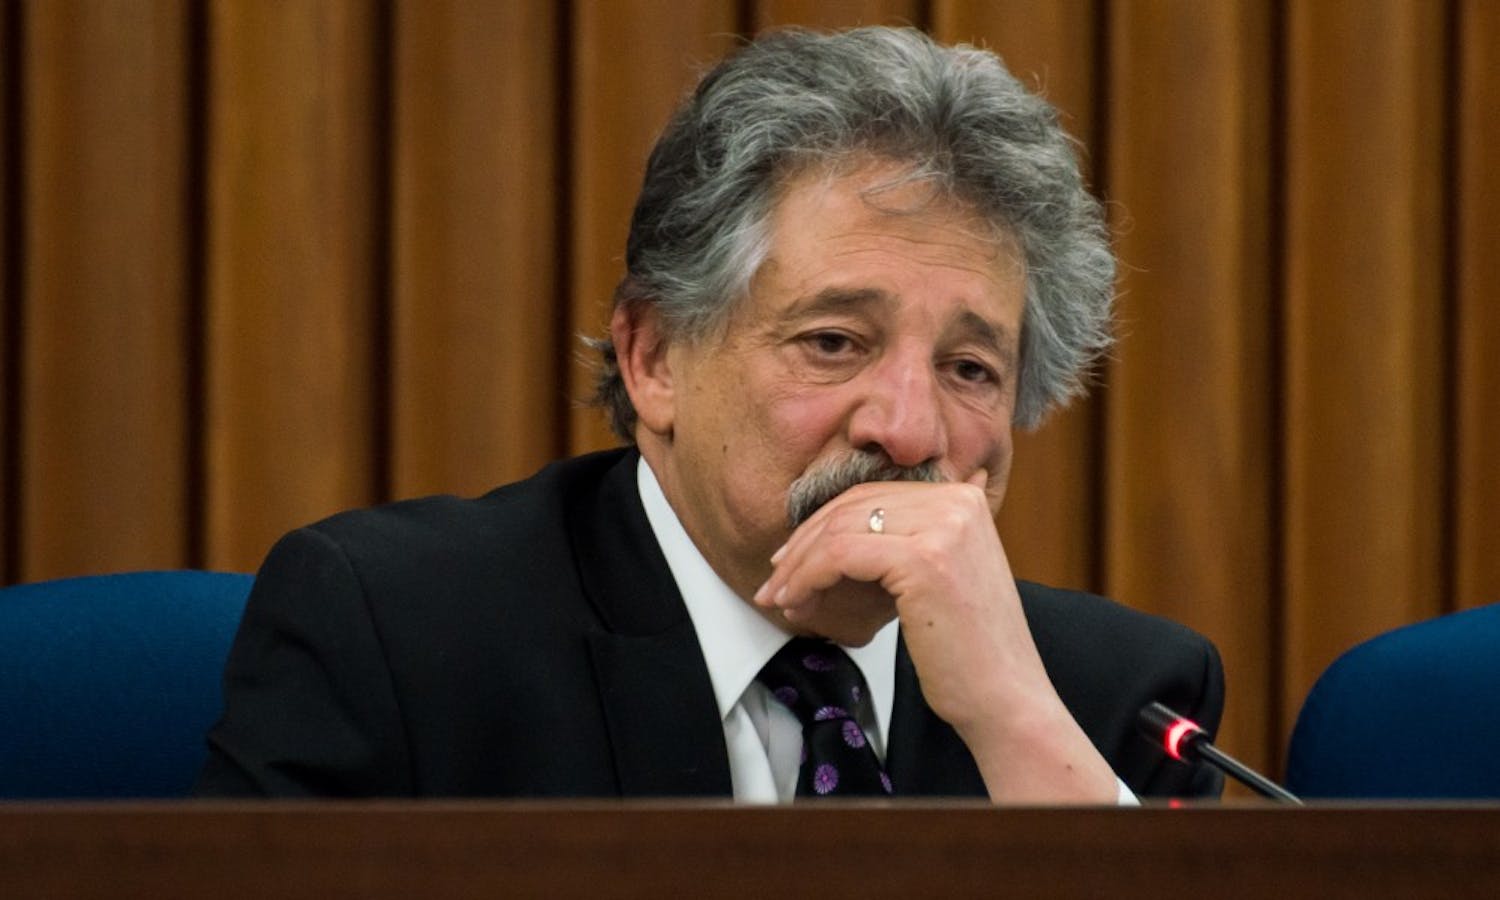 Madison Mayor Paul Soglin held a press conference Wednesday to publicly oppose the state legislature’s restrictions on municipalities.